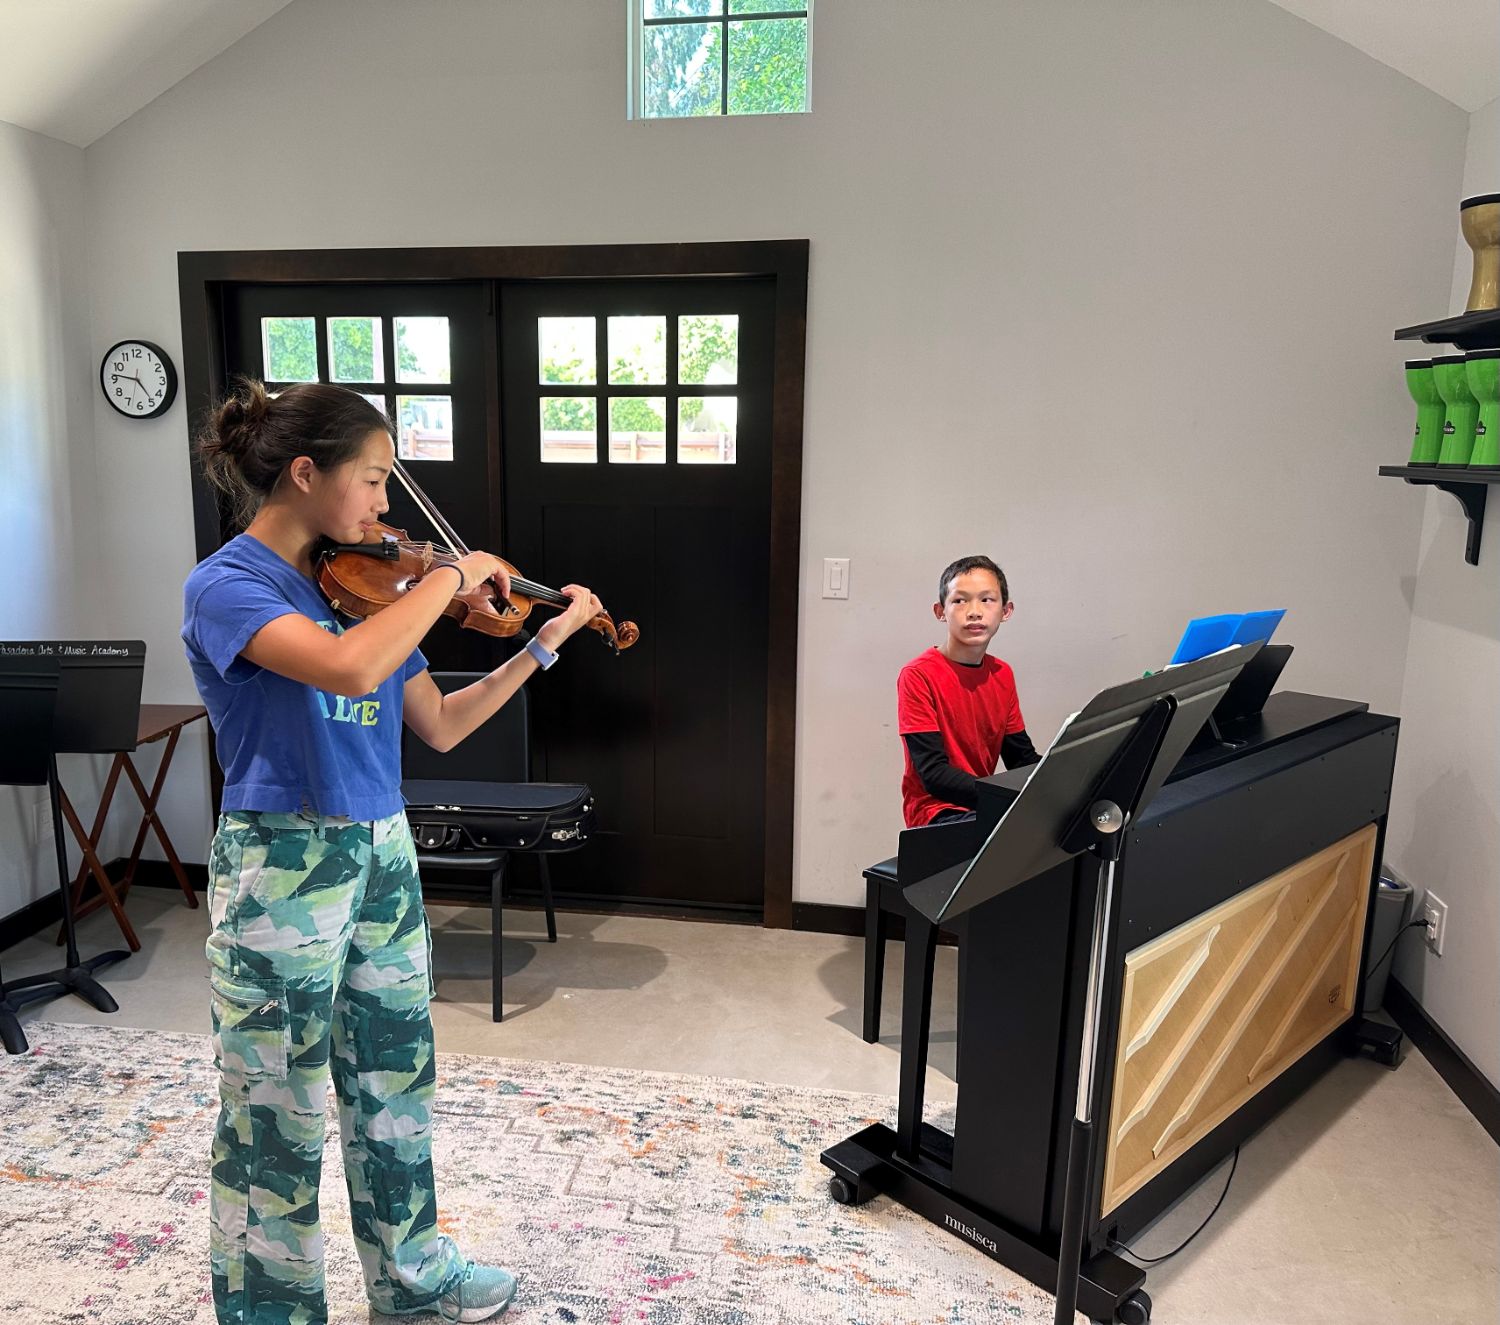 South Pasadena Conservatory of Arts and Music | Music Lessons Week | $10 South Pasadena